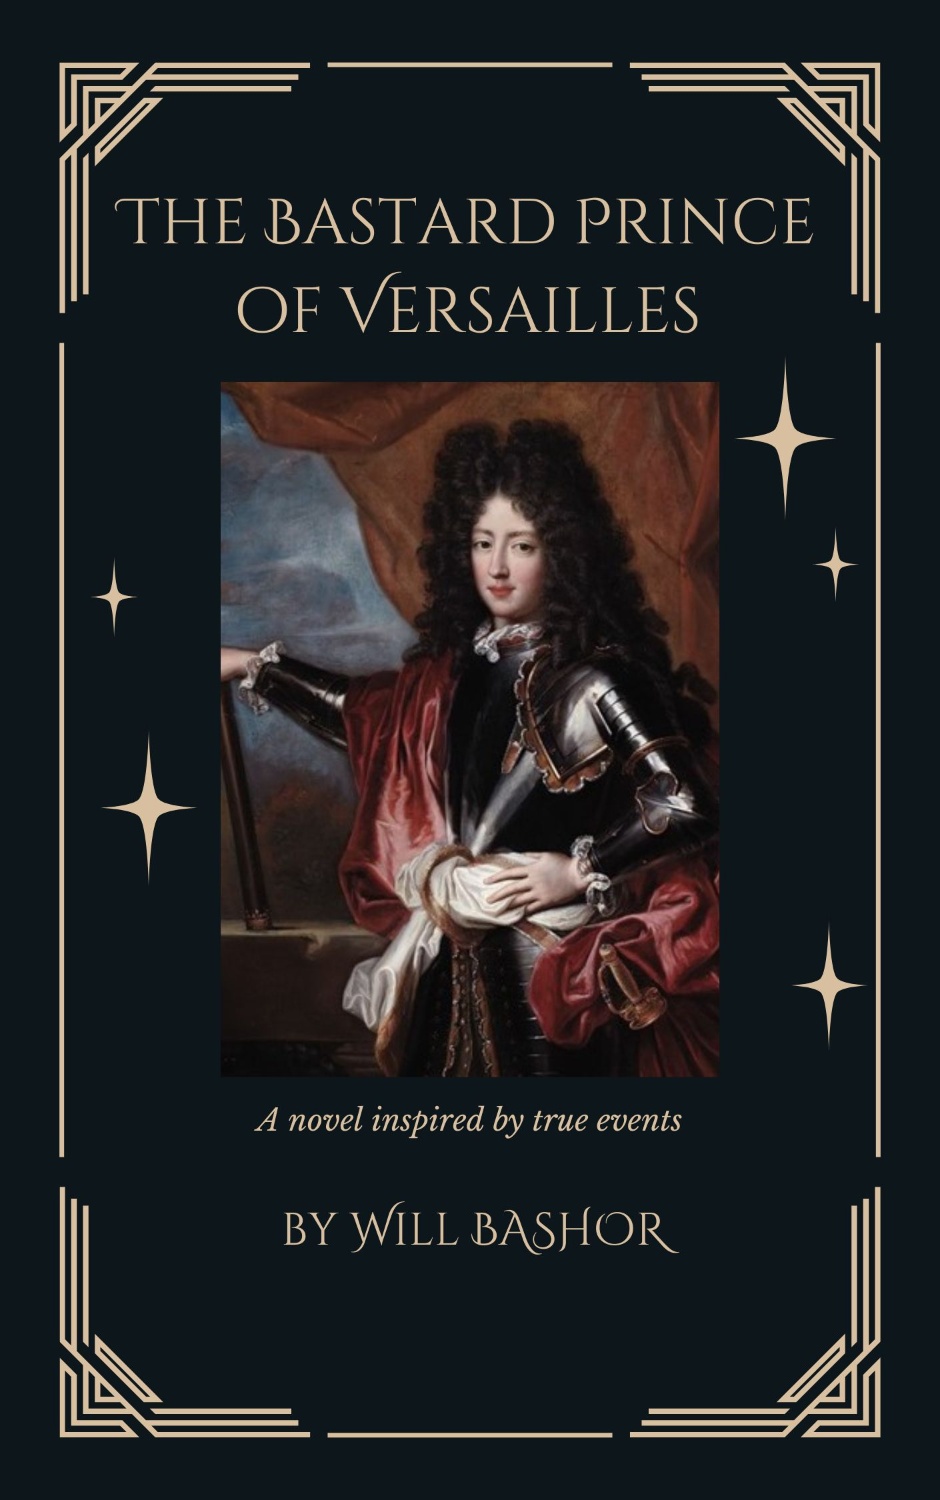 The Bastard Prince of Versailles: A Novel Inspired by True Events